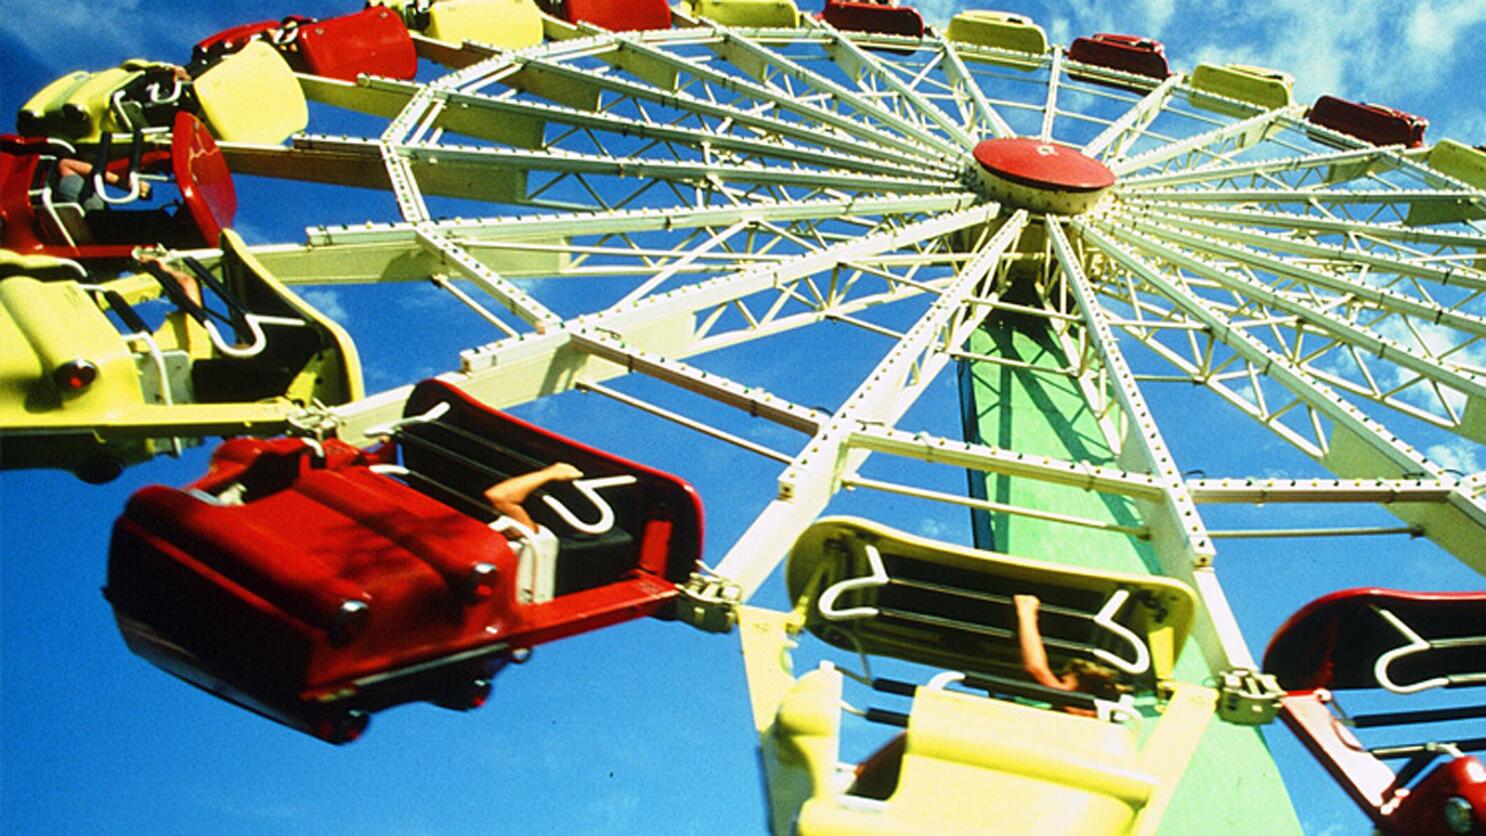 centrifugal force ride